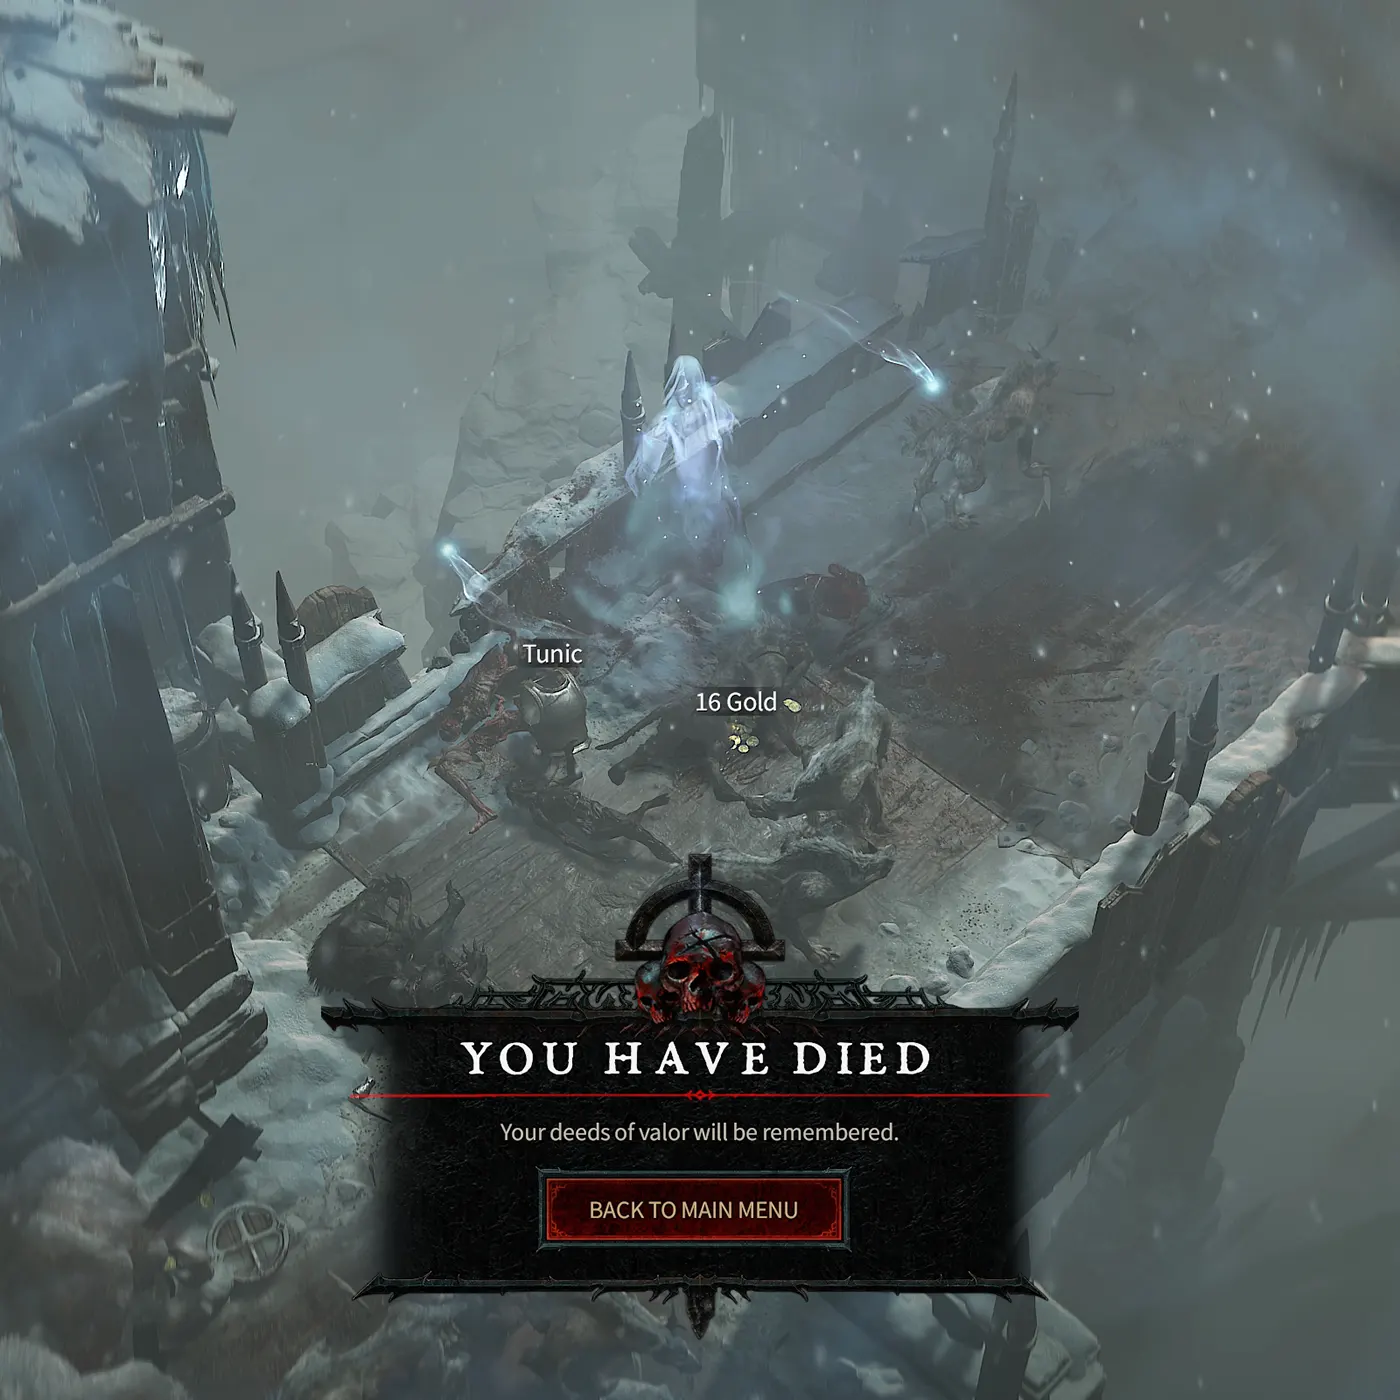 Message given to dead Diablo 4 Hardcore characters over Level 10